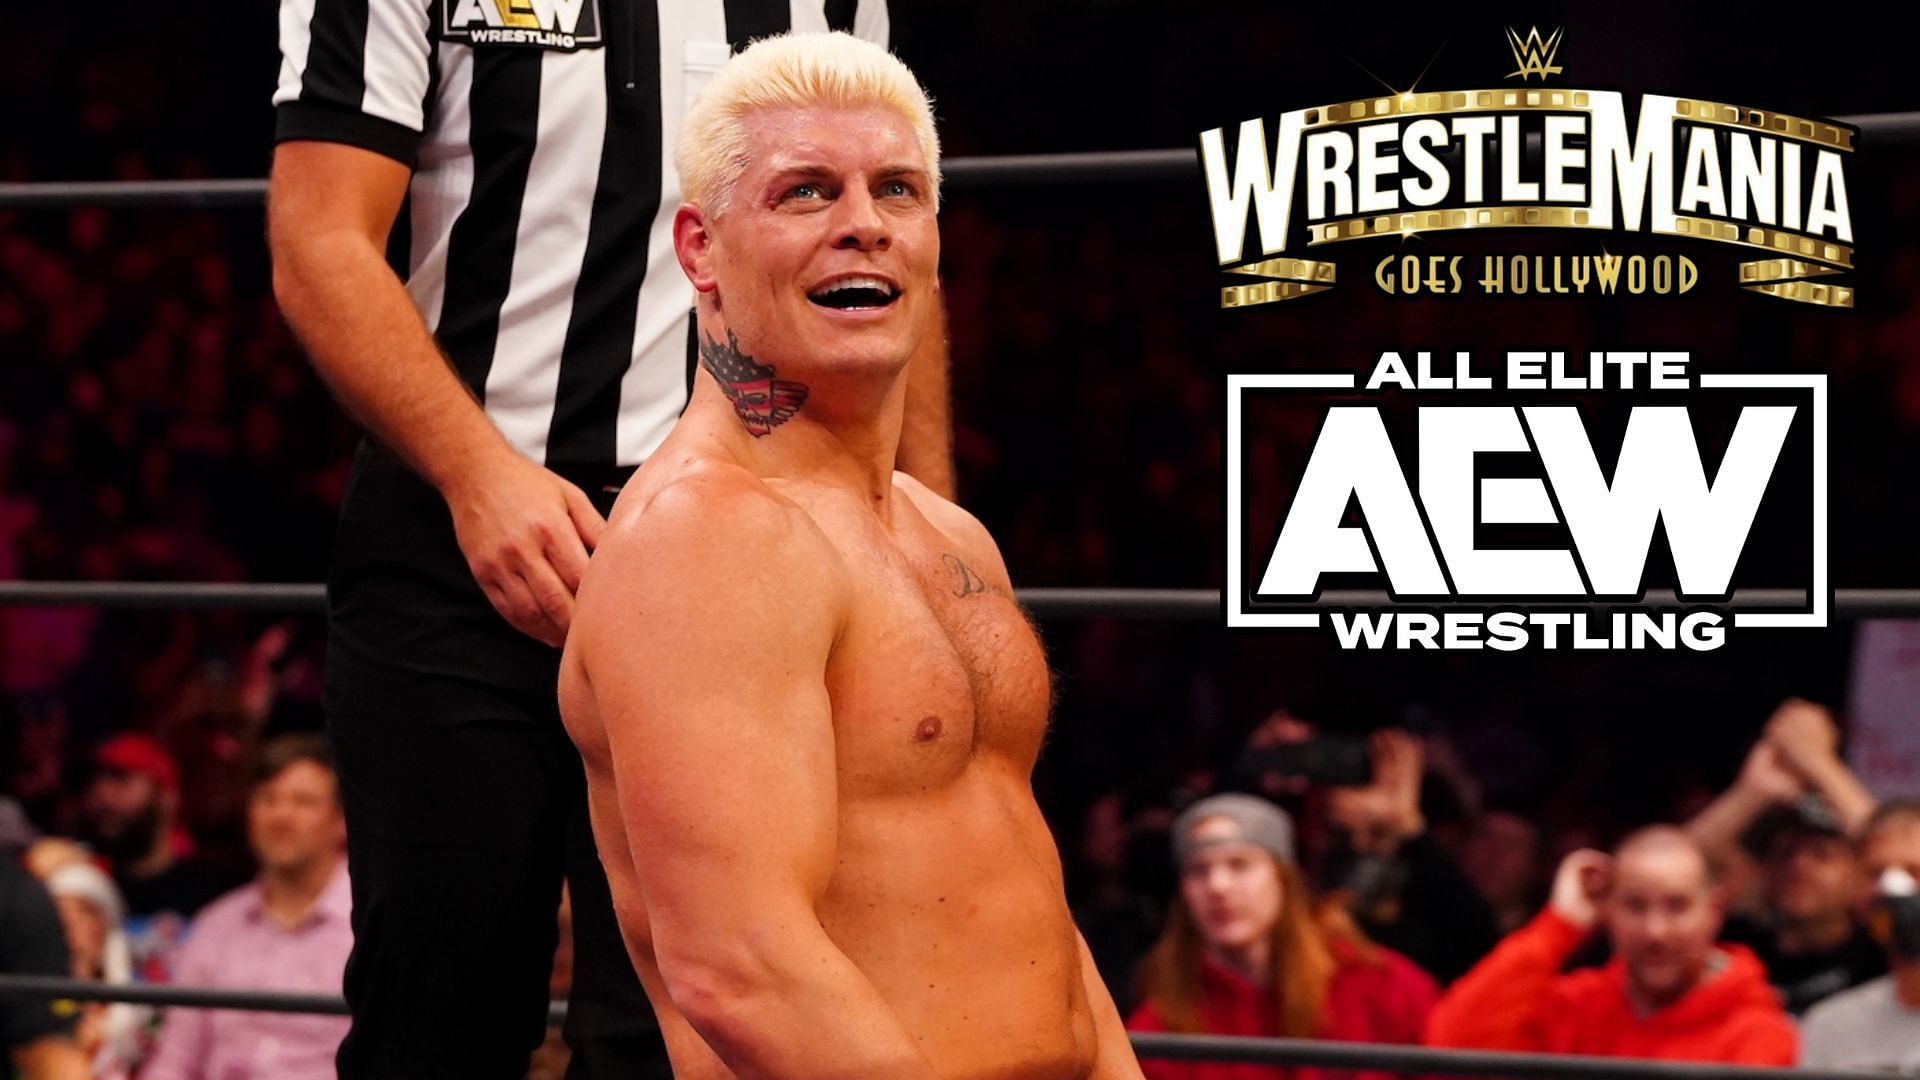 Does Cody Rhodes believe his AEW run could have been better?